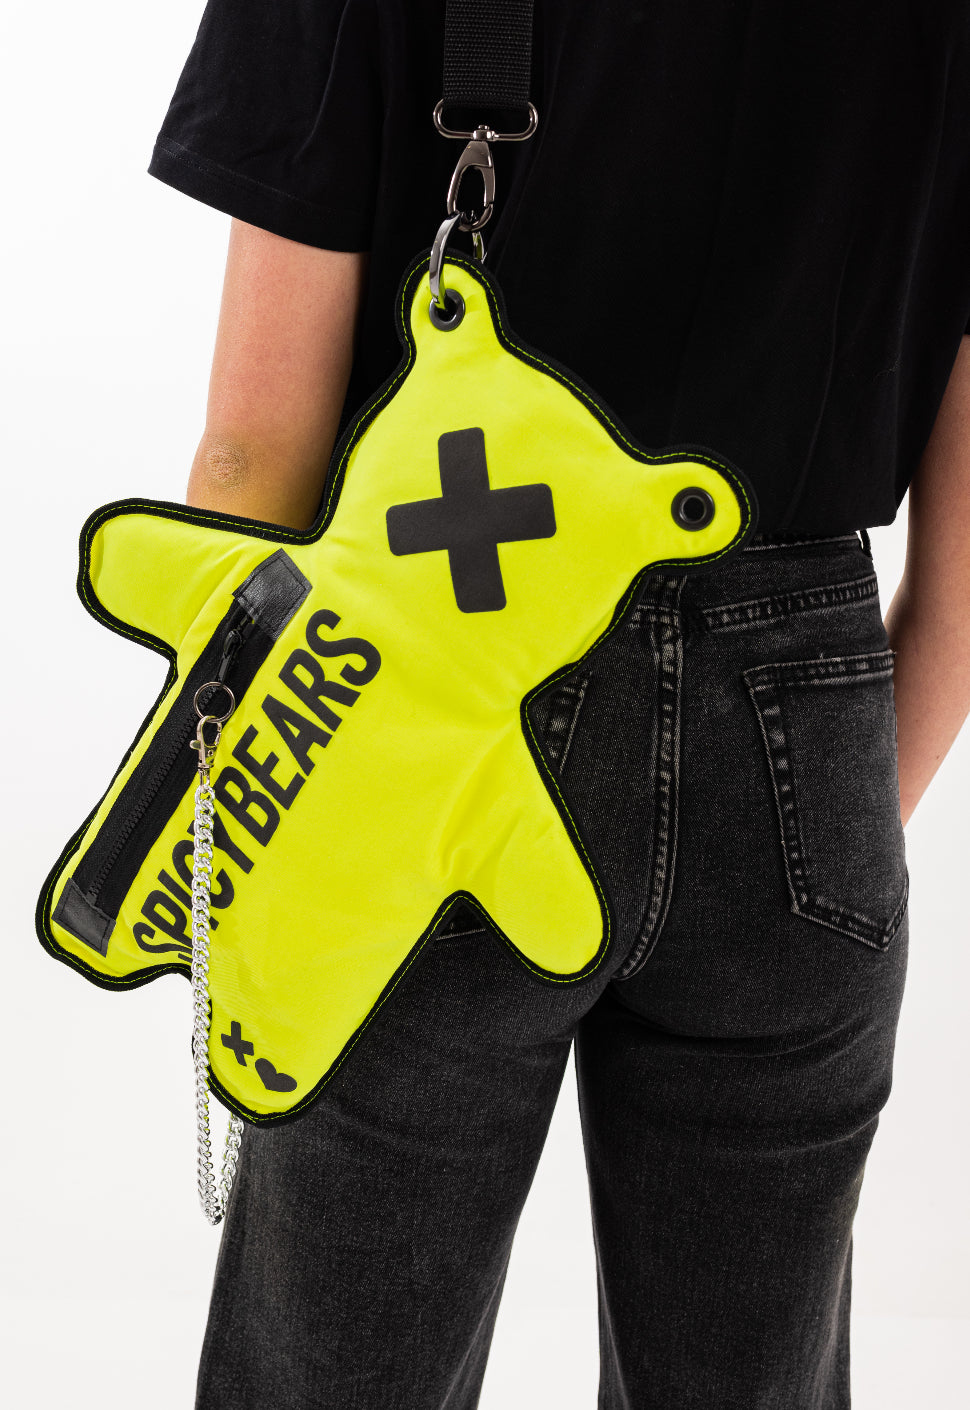 Stylish and Unique Neon Yellow SPICYBEARS Bag with Bold Color and Black Print